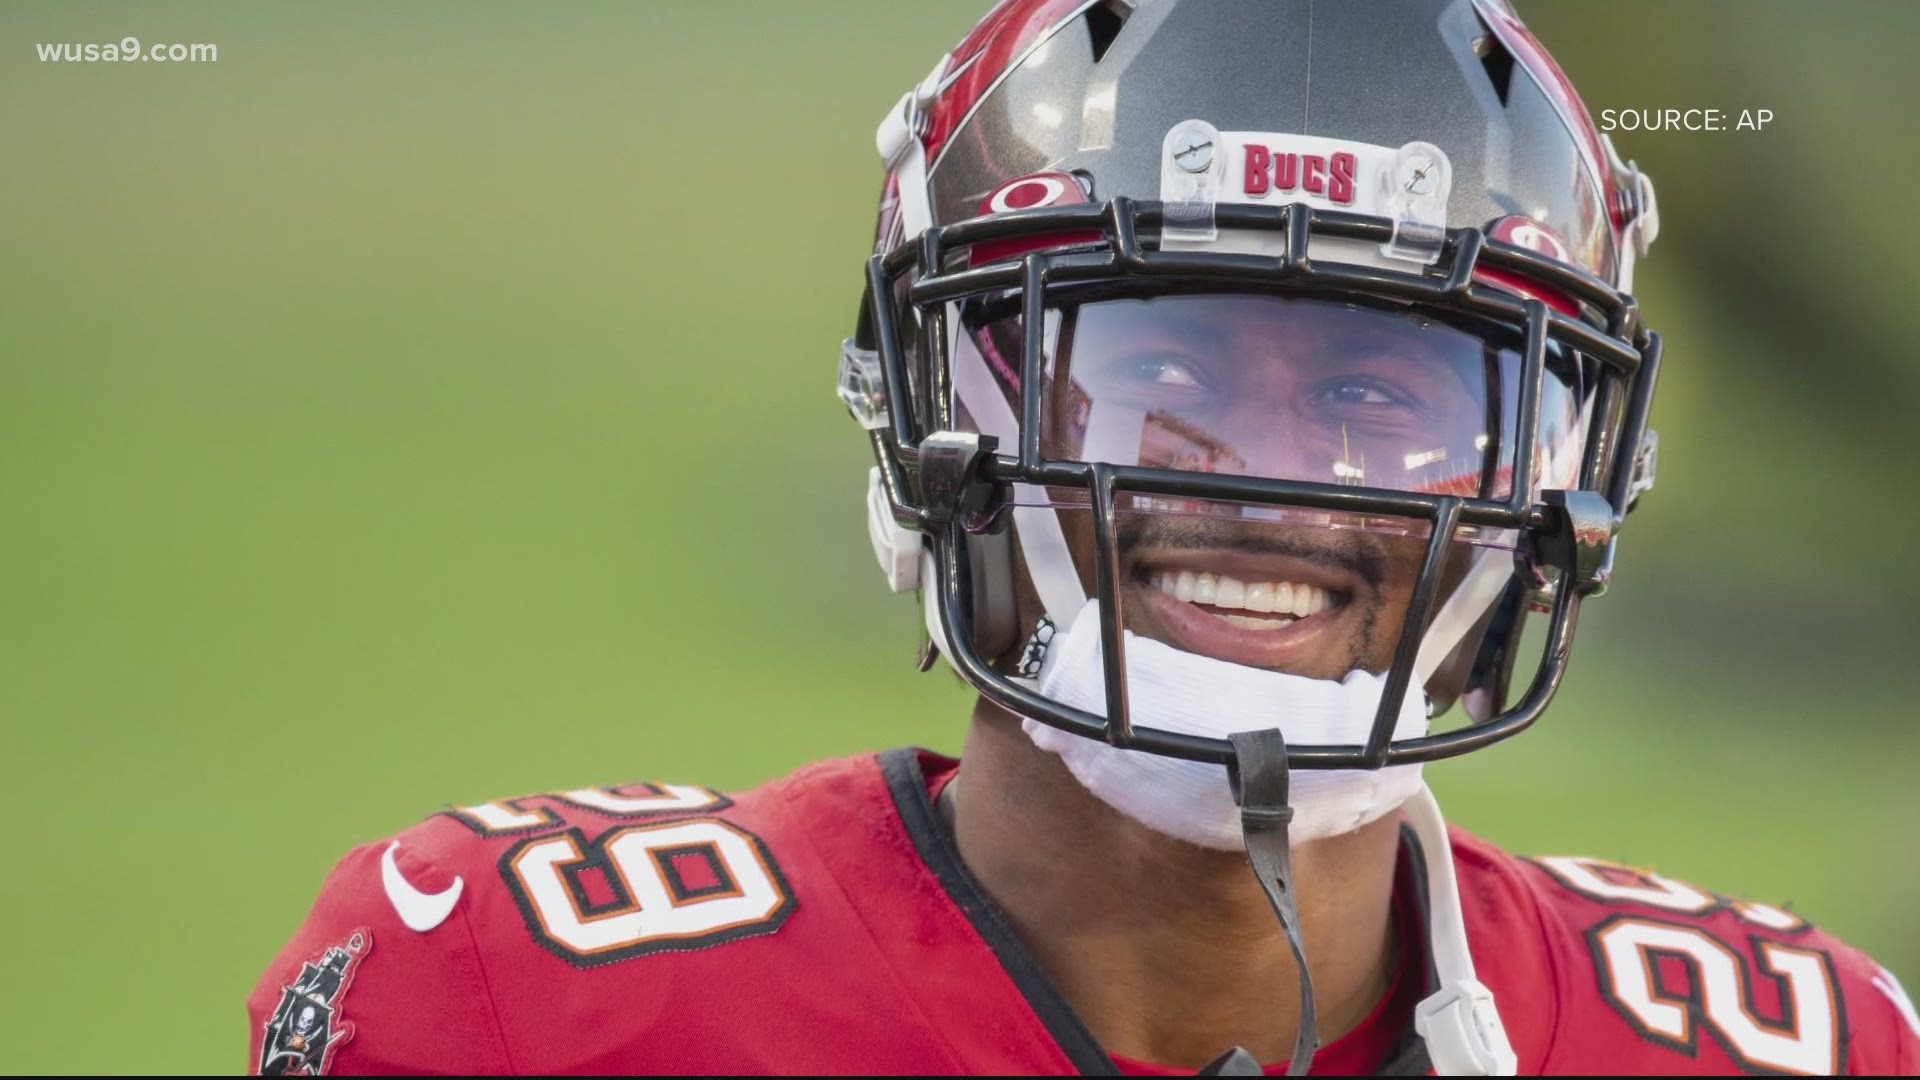 After growing up in Upper Marlboro, Bucs CB set for Super Bowl 